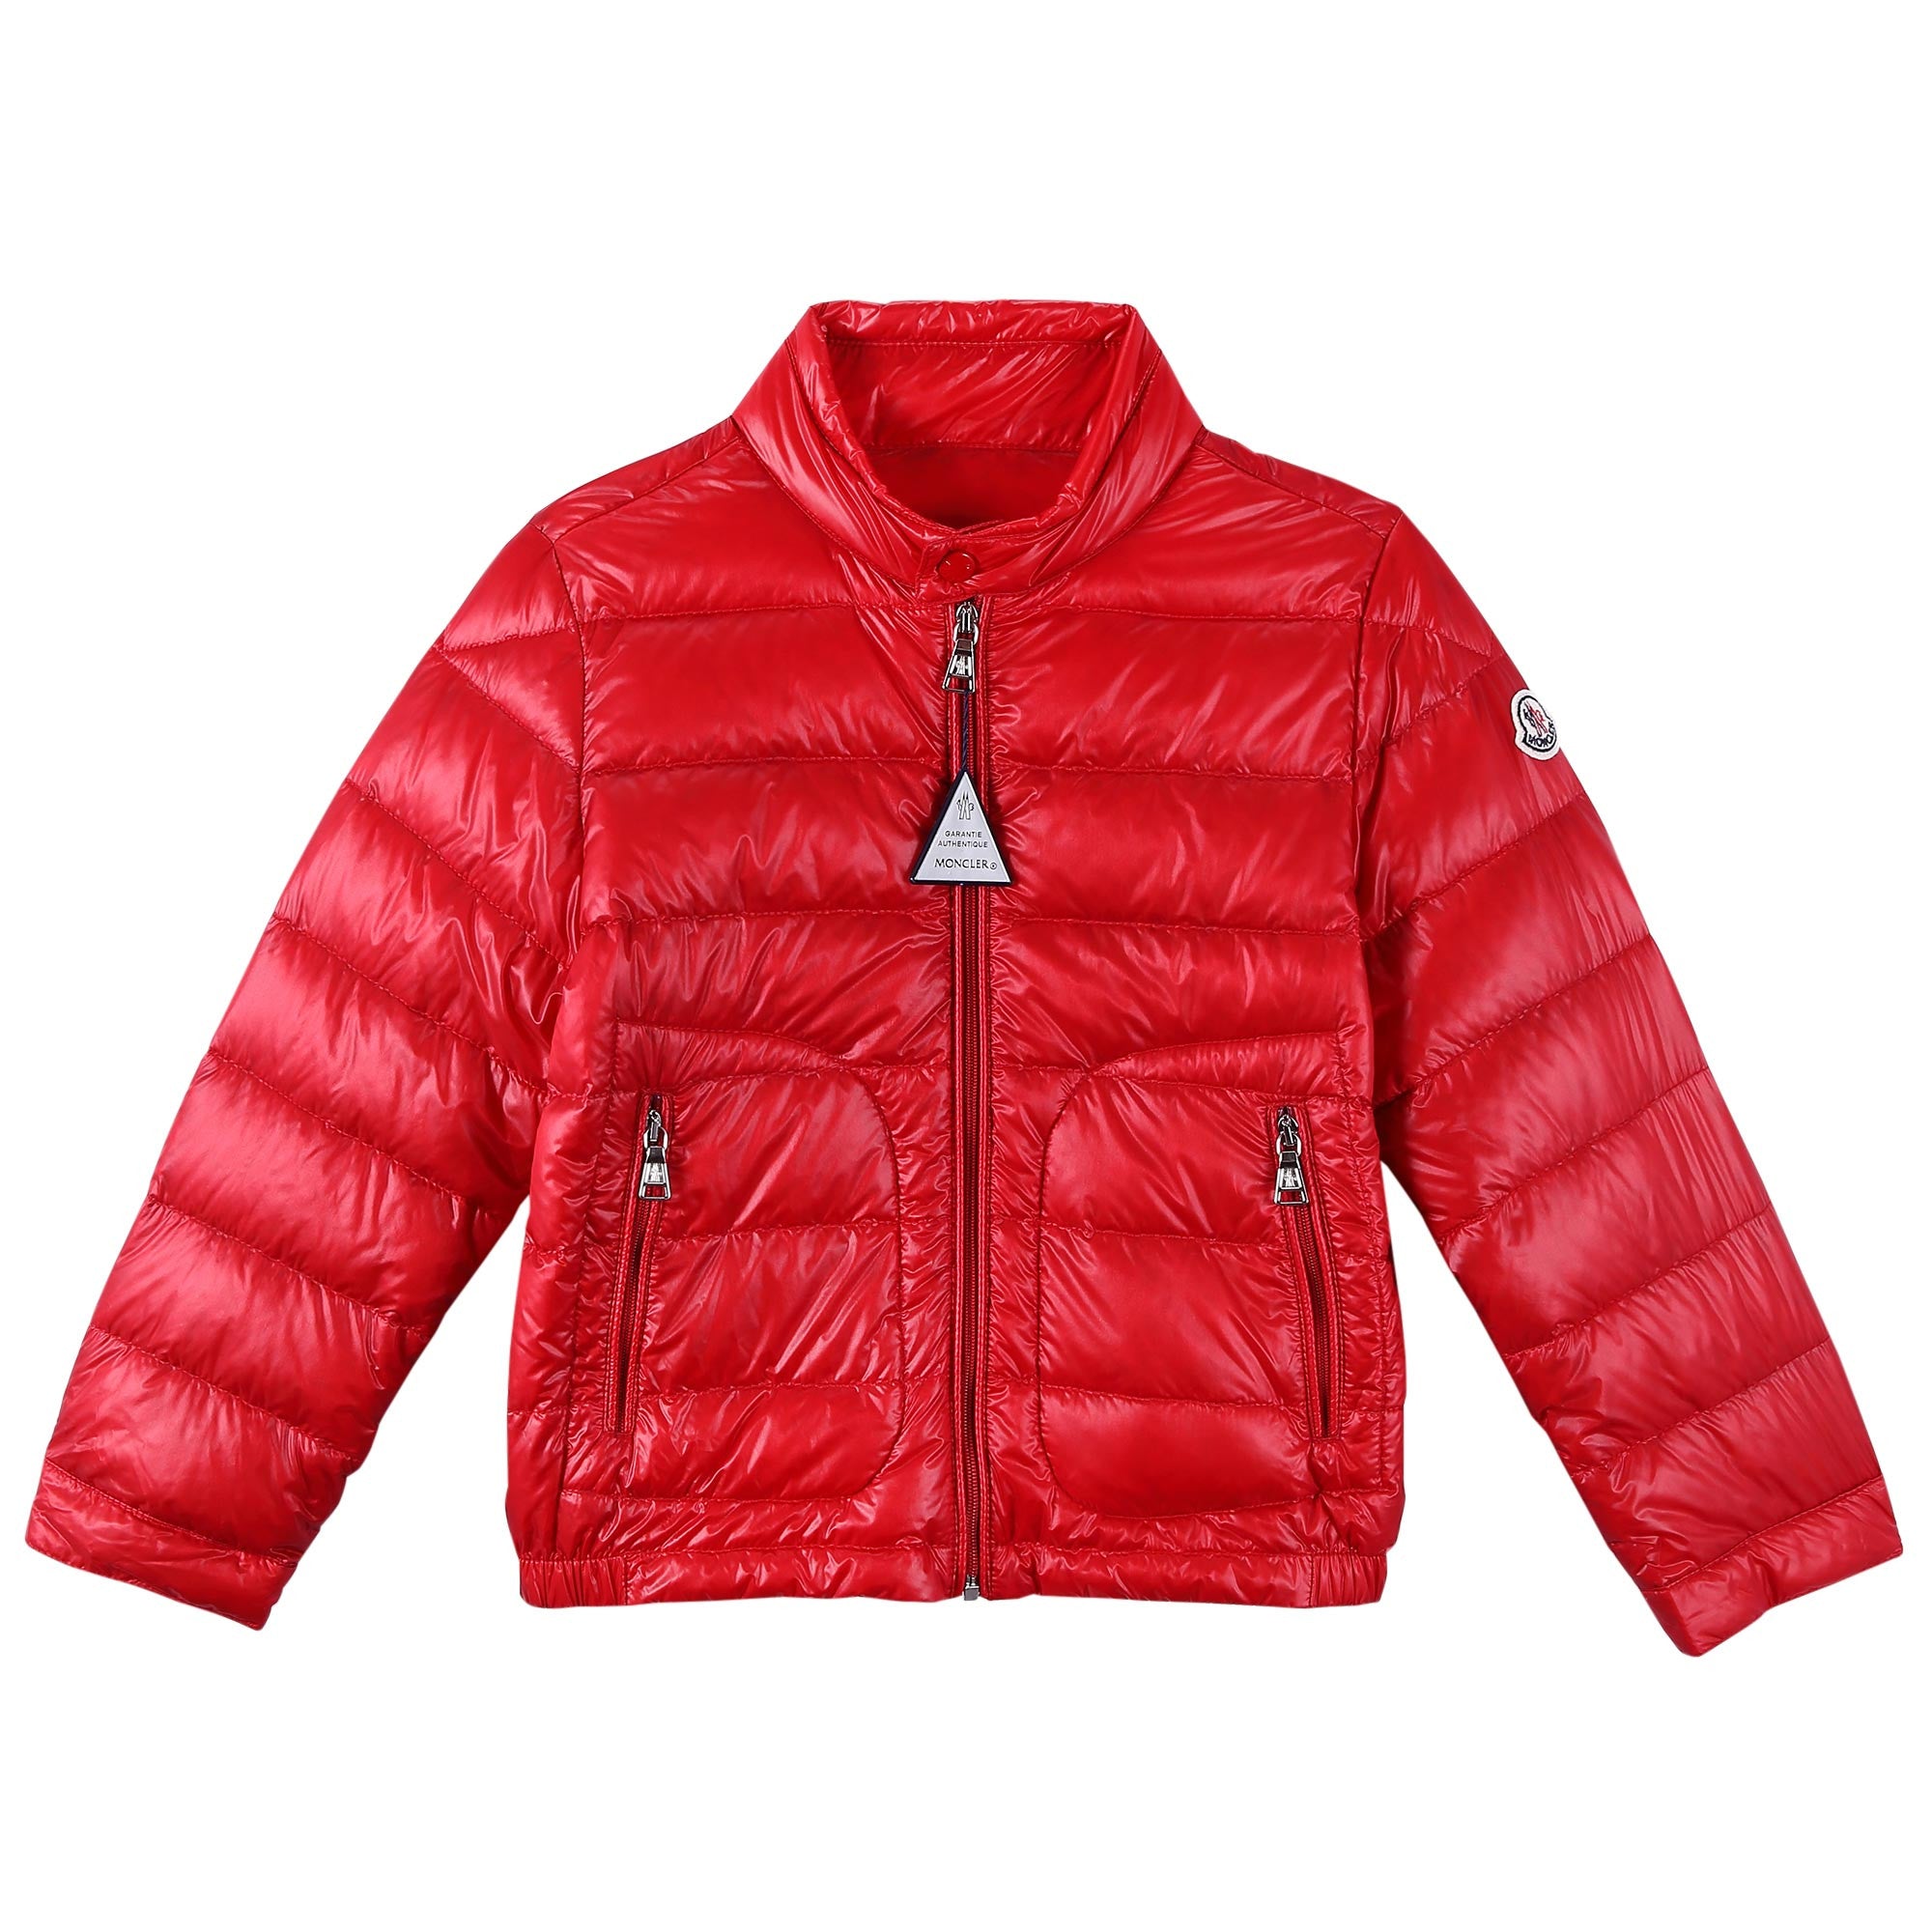 Boys Orange-Red Down Padded 'Acrous' Jacket With Hidden Pocket - CÉMAROSE | Children's Fashion Store - 1